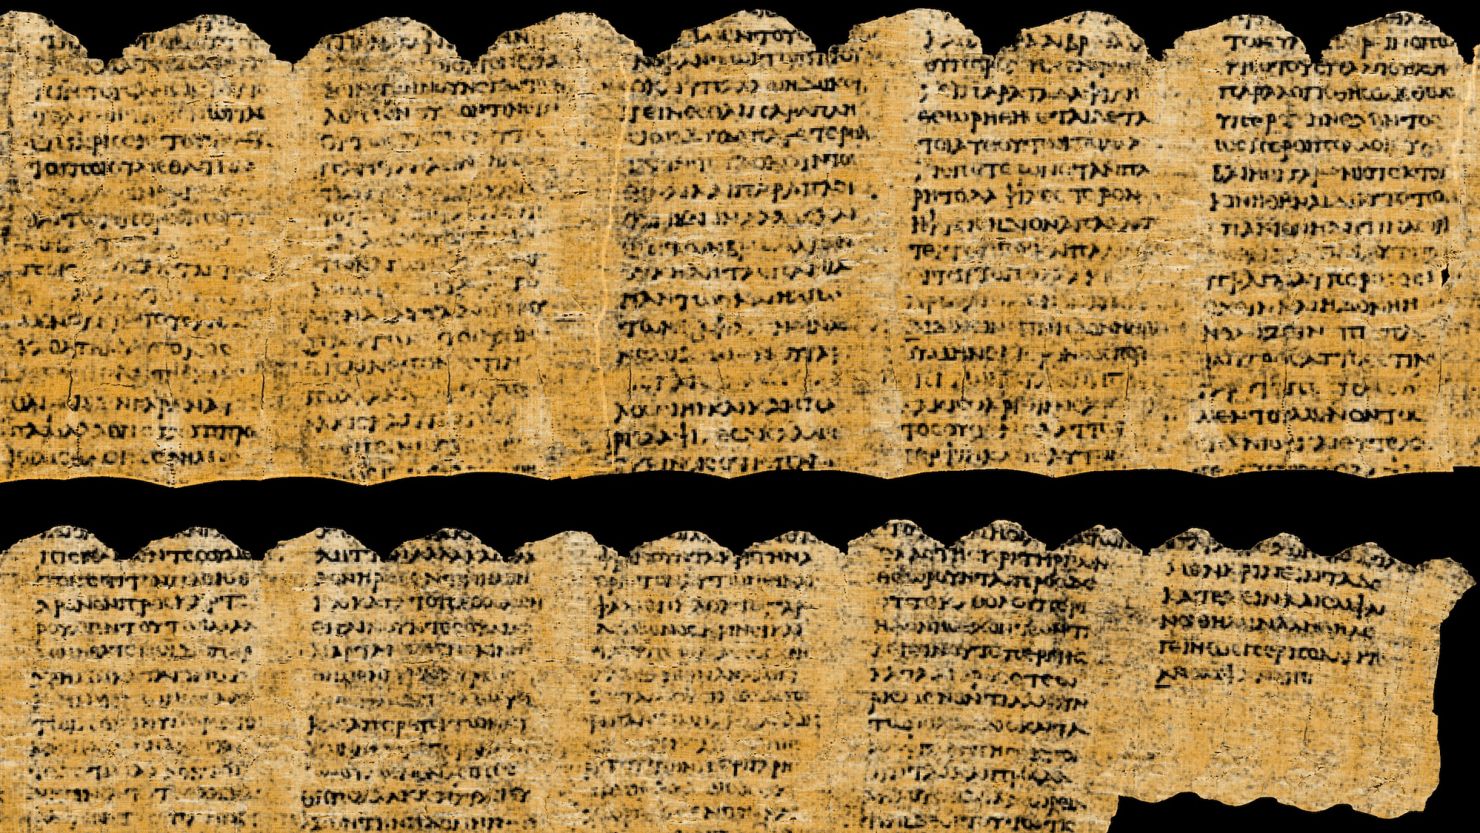 A total of 15 passages were deciphered from the unrolled Herculaneum scroll.